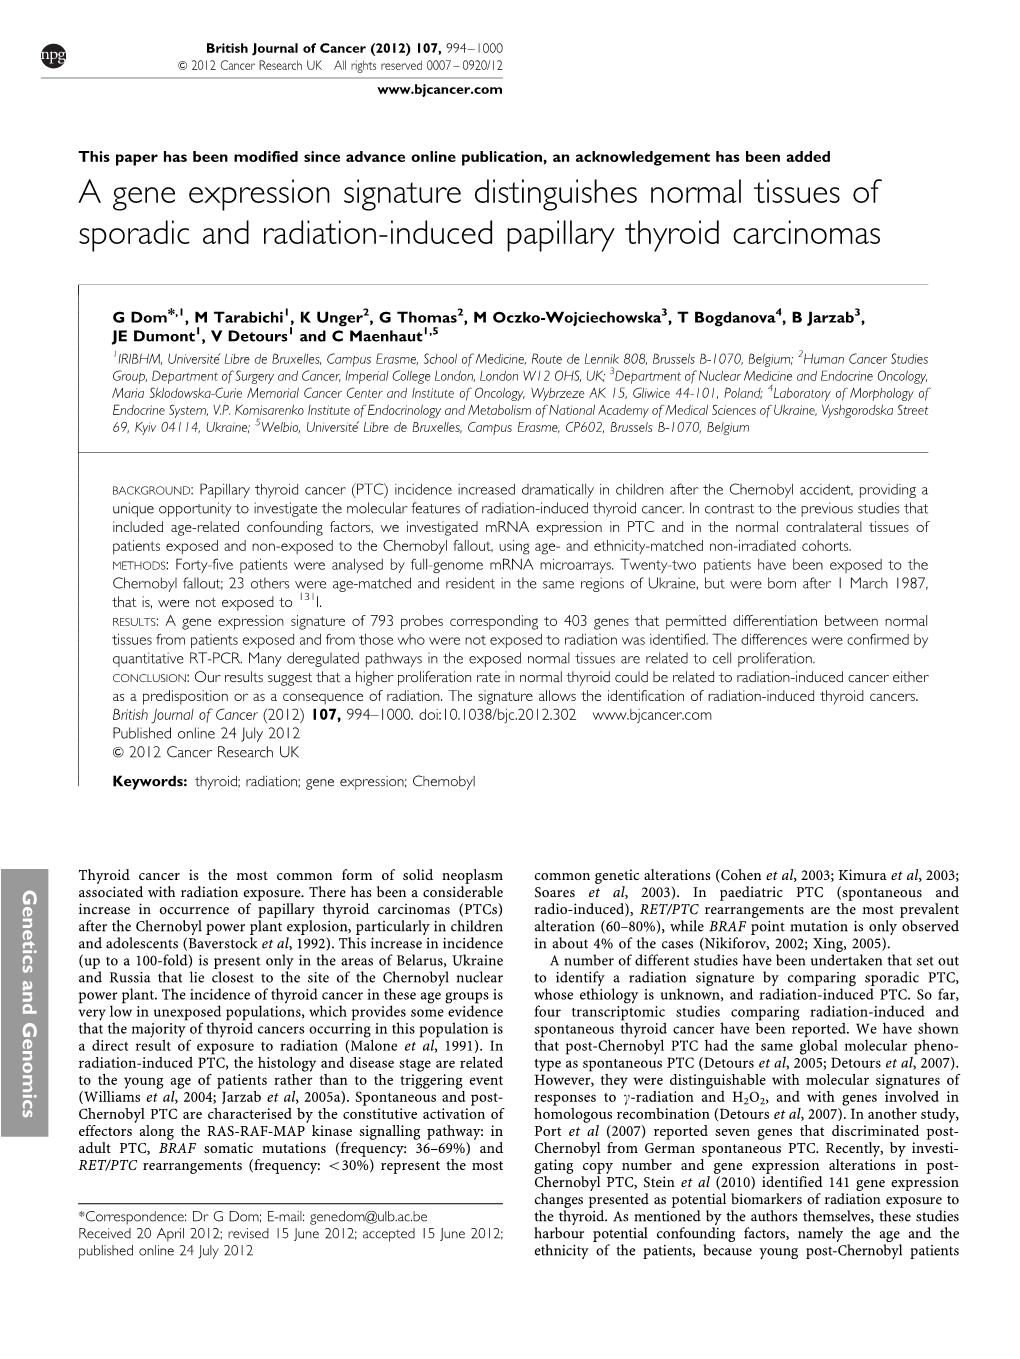 A Gene Expression Signature Distinguishes Normal Tissues of Sporadic and Radiation-Induced Papillary Thyroid Carcinomas